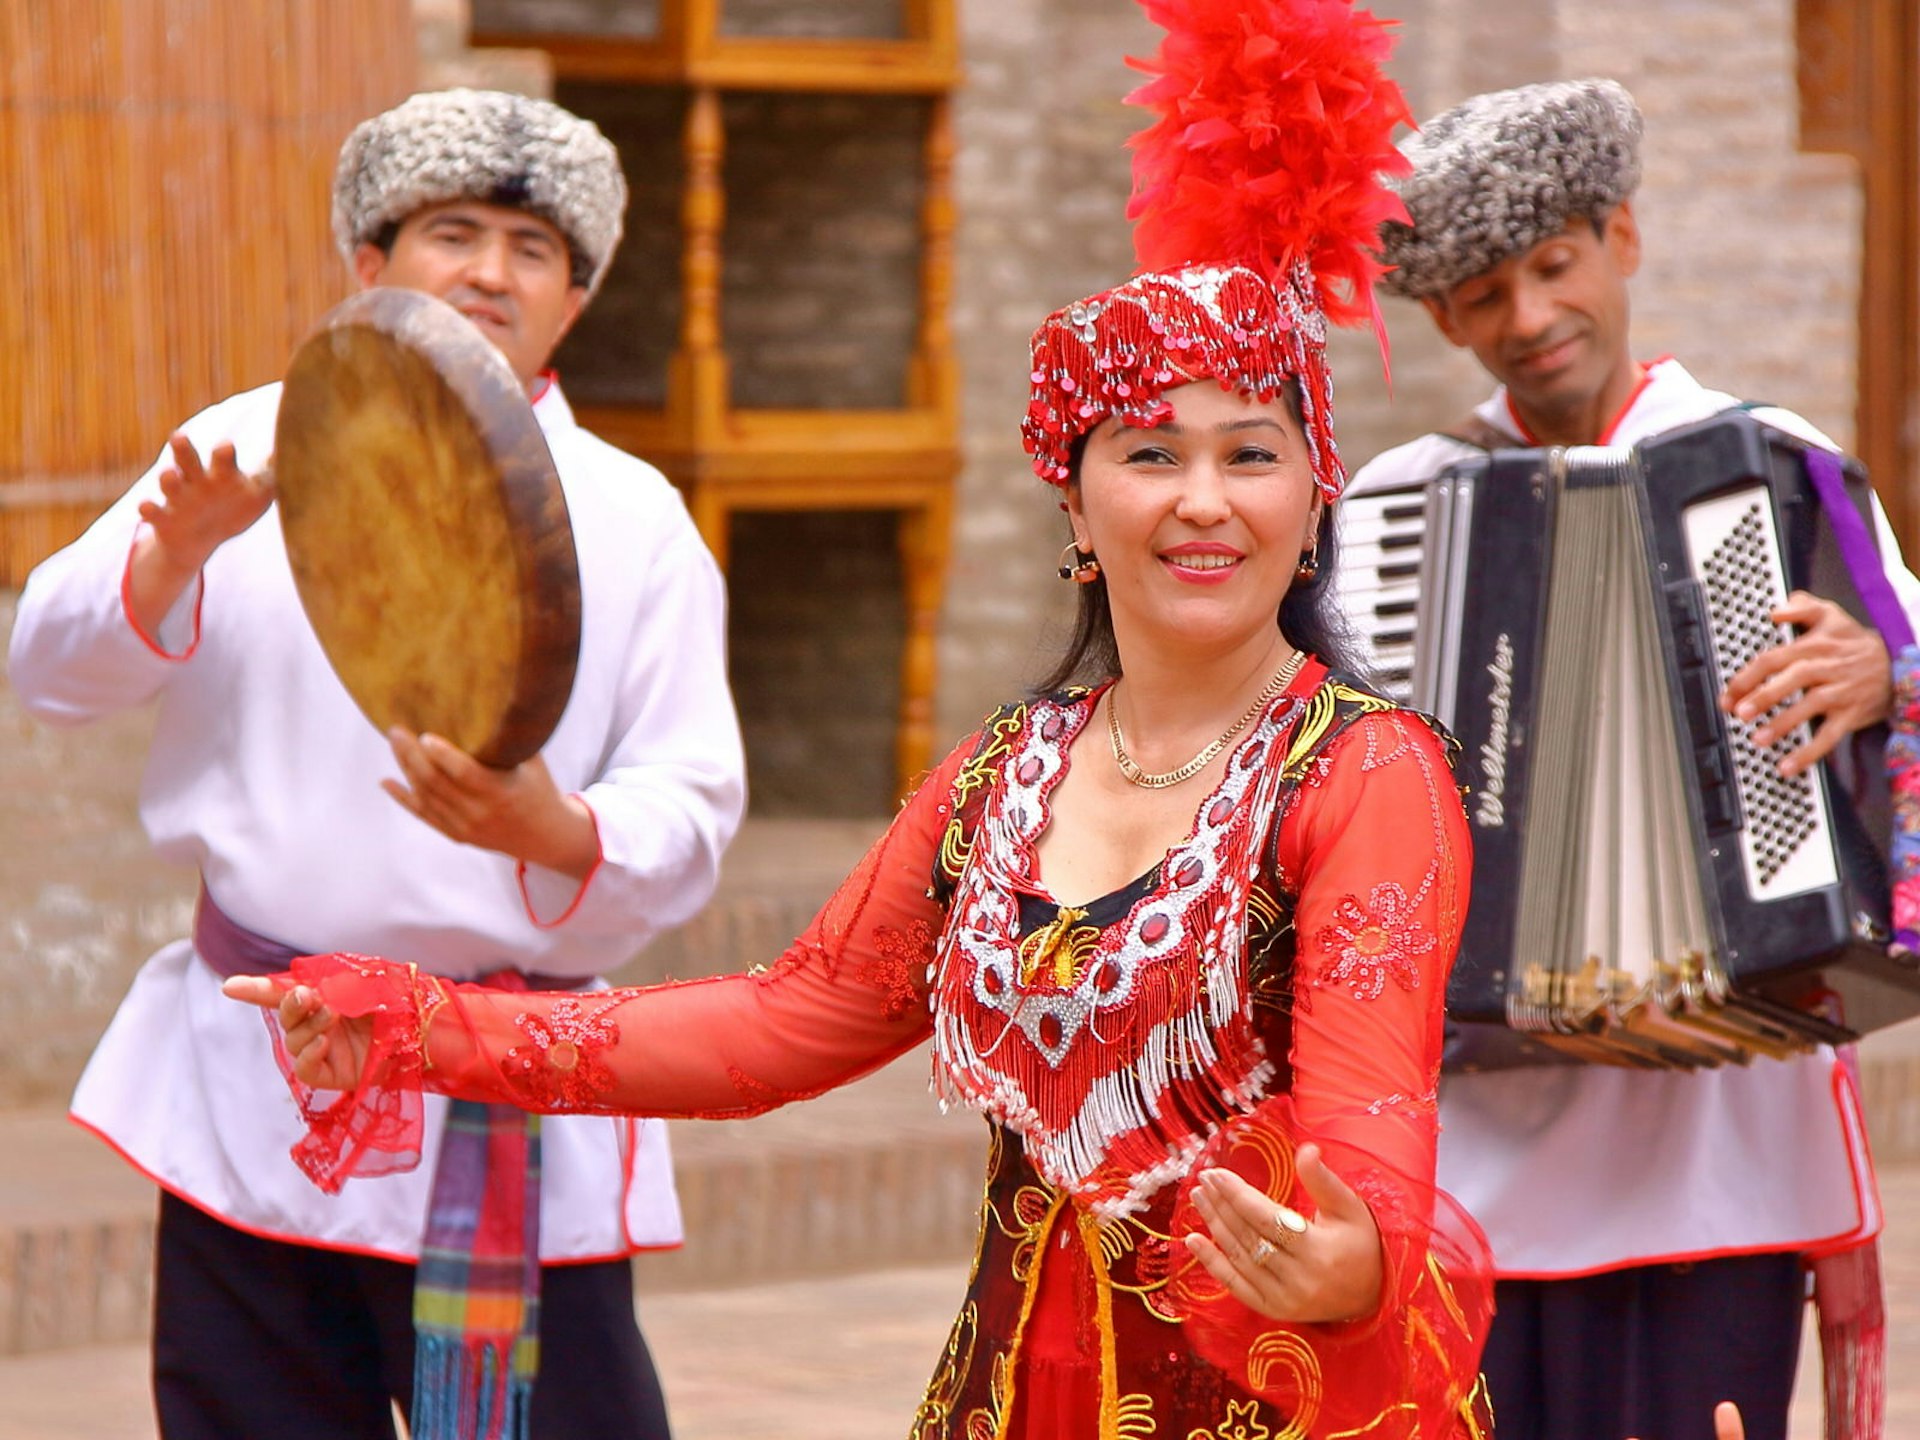 A woman in red traditional Uzbek costume with beads and a feathered hat dances in front of two musicians, one drummer and one accordion player. Welcoming people: performers demonstrate traditional Uzbek music and dance in the ancient city of Khiva, soon to be connected by high-speed rail © Christophe Cappelli / Shutterstock